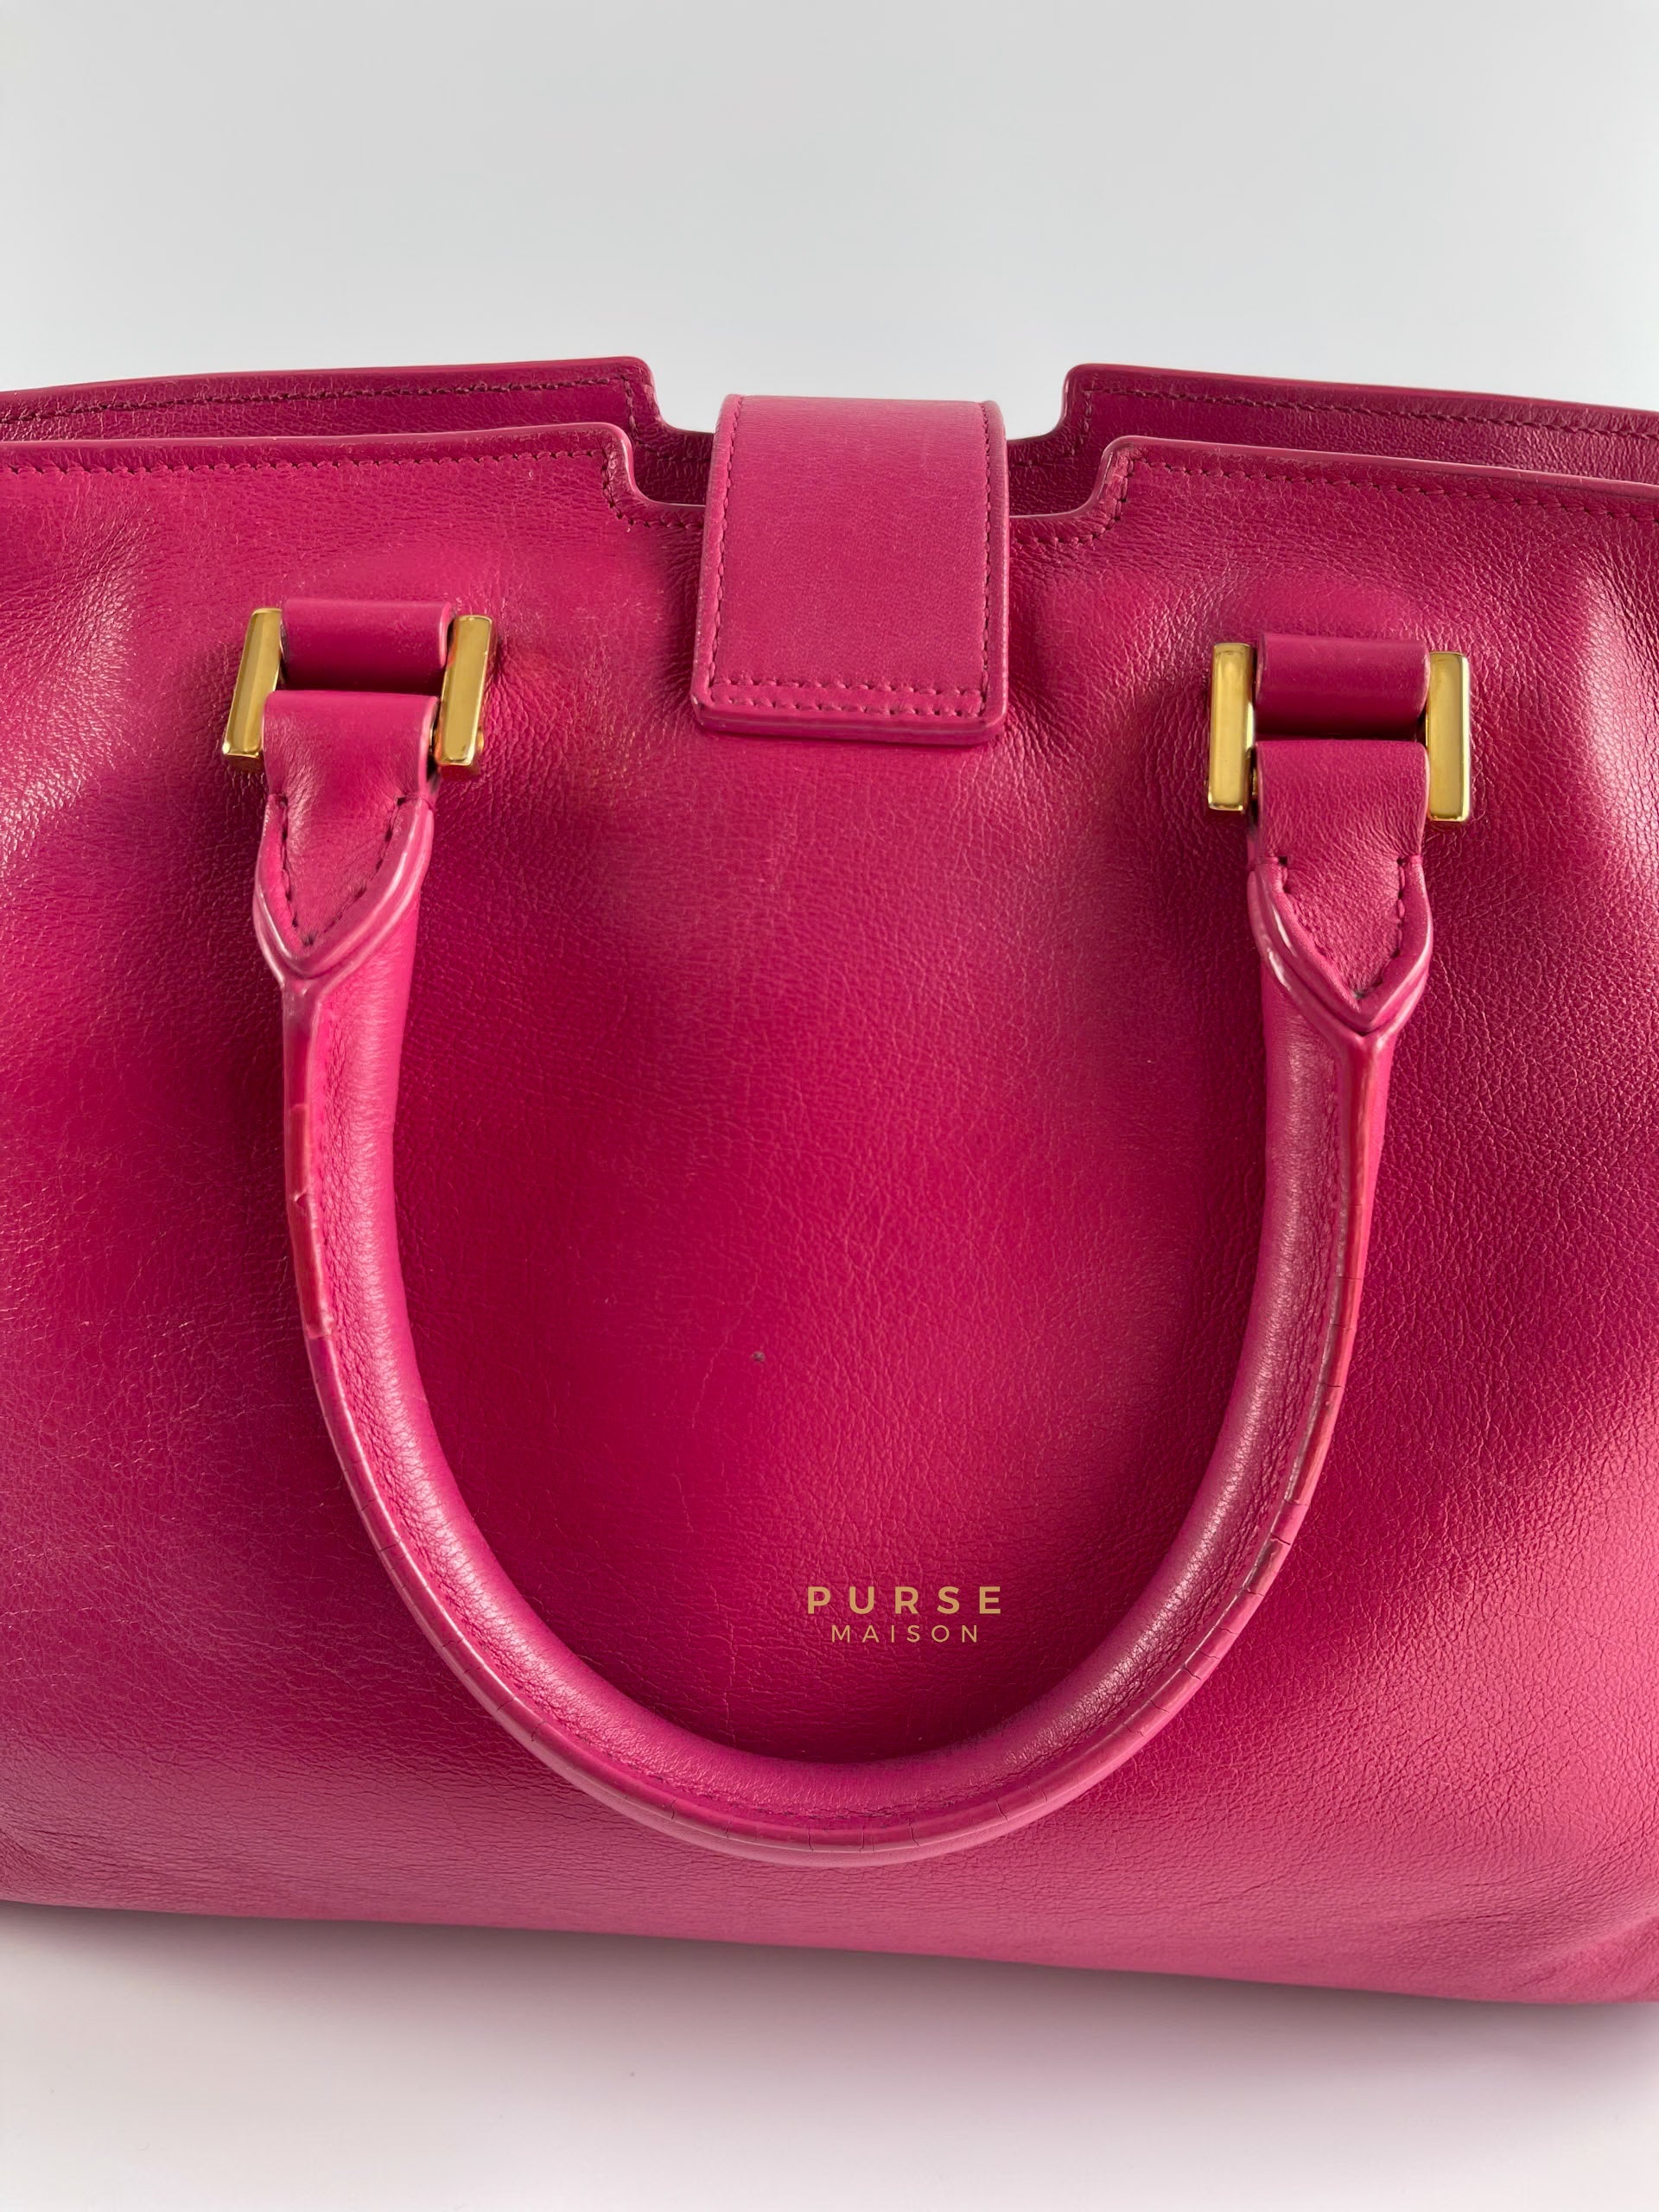 Cabas Chyc Classic Y Small in Fuchia Calfskin Leather | Purse Maison Luxury Bags Shop